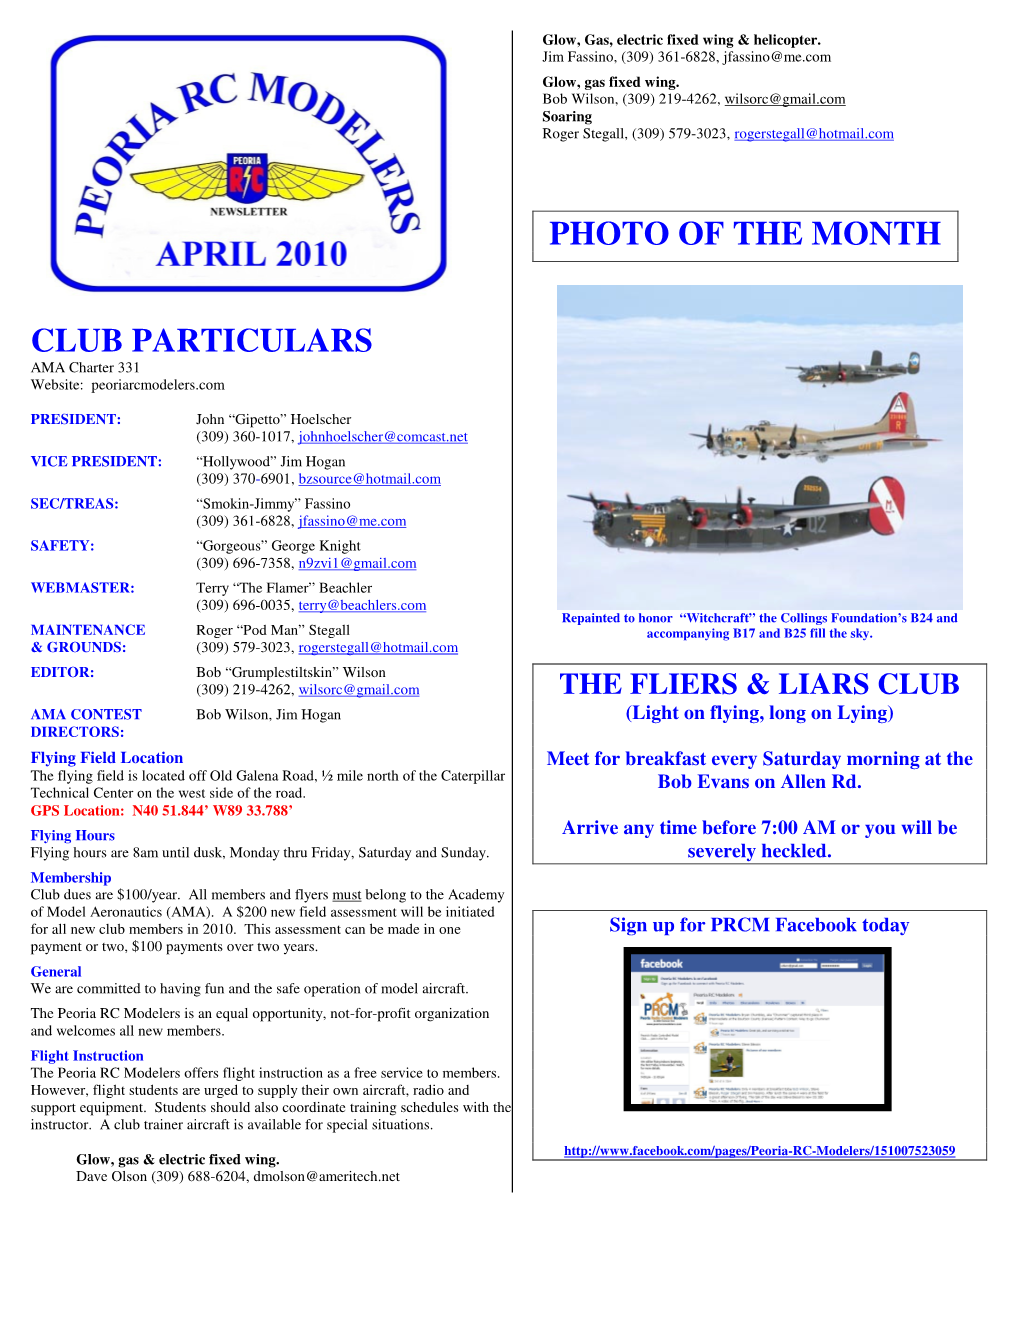 Club Particulars Photo of the Month